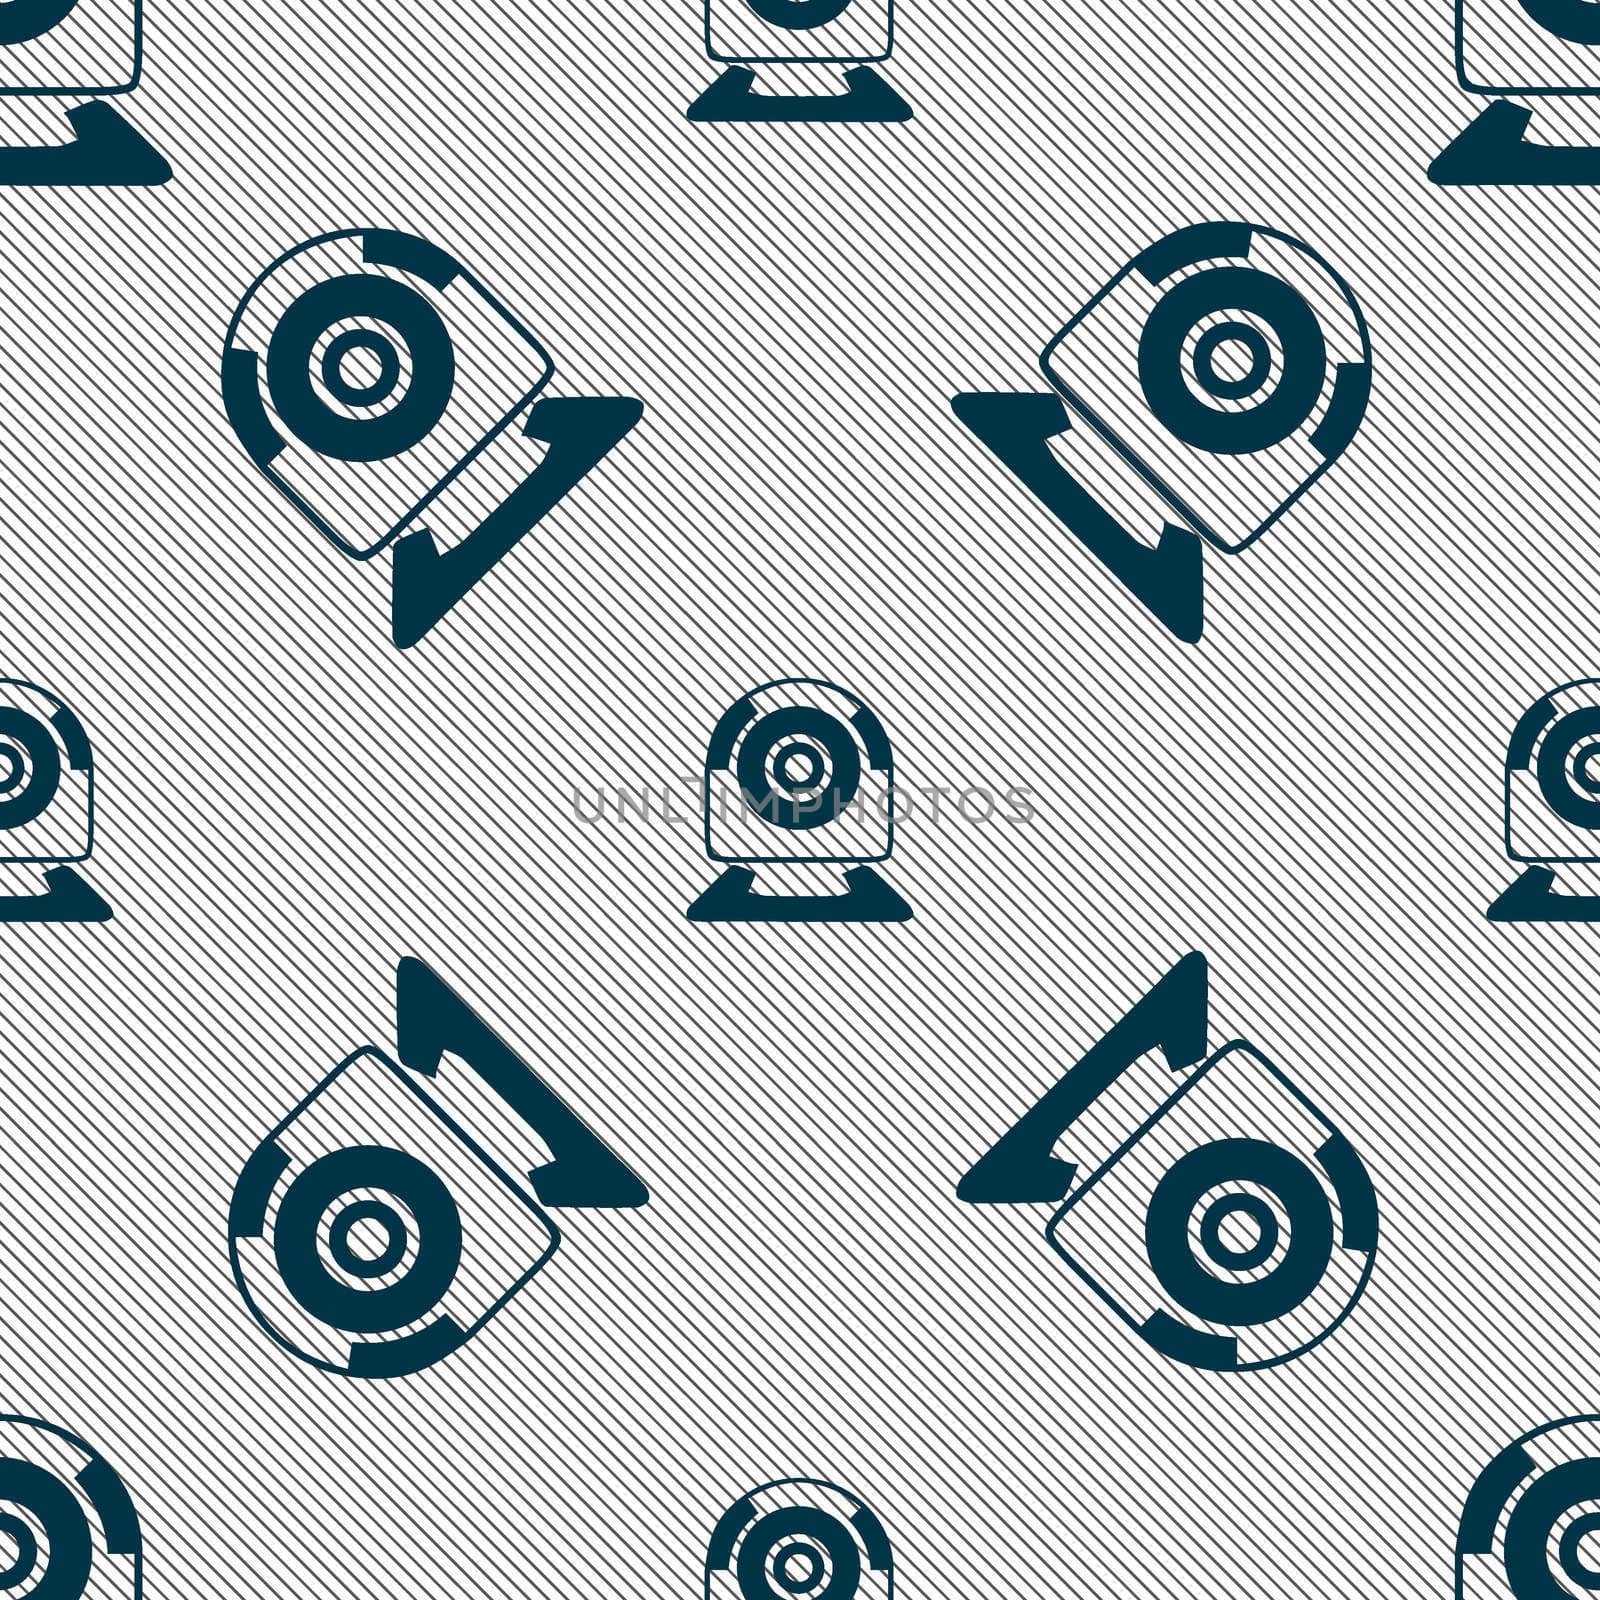 Webcam sign icon. Web video chat symbol. Camera chat. Seamless pattern with geometric texture.  by serhii_lohvyniuk